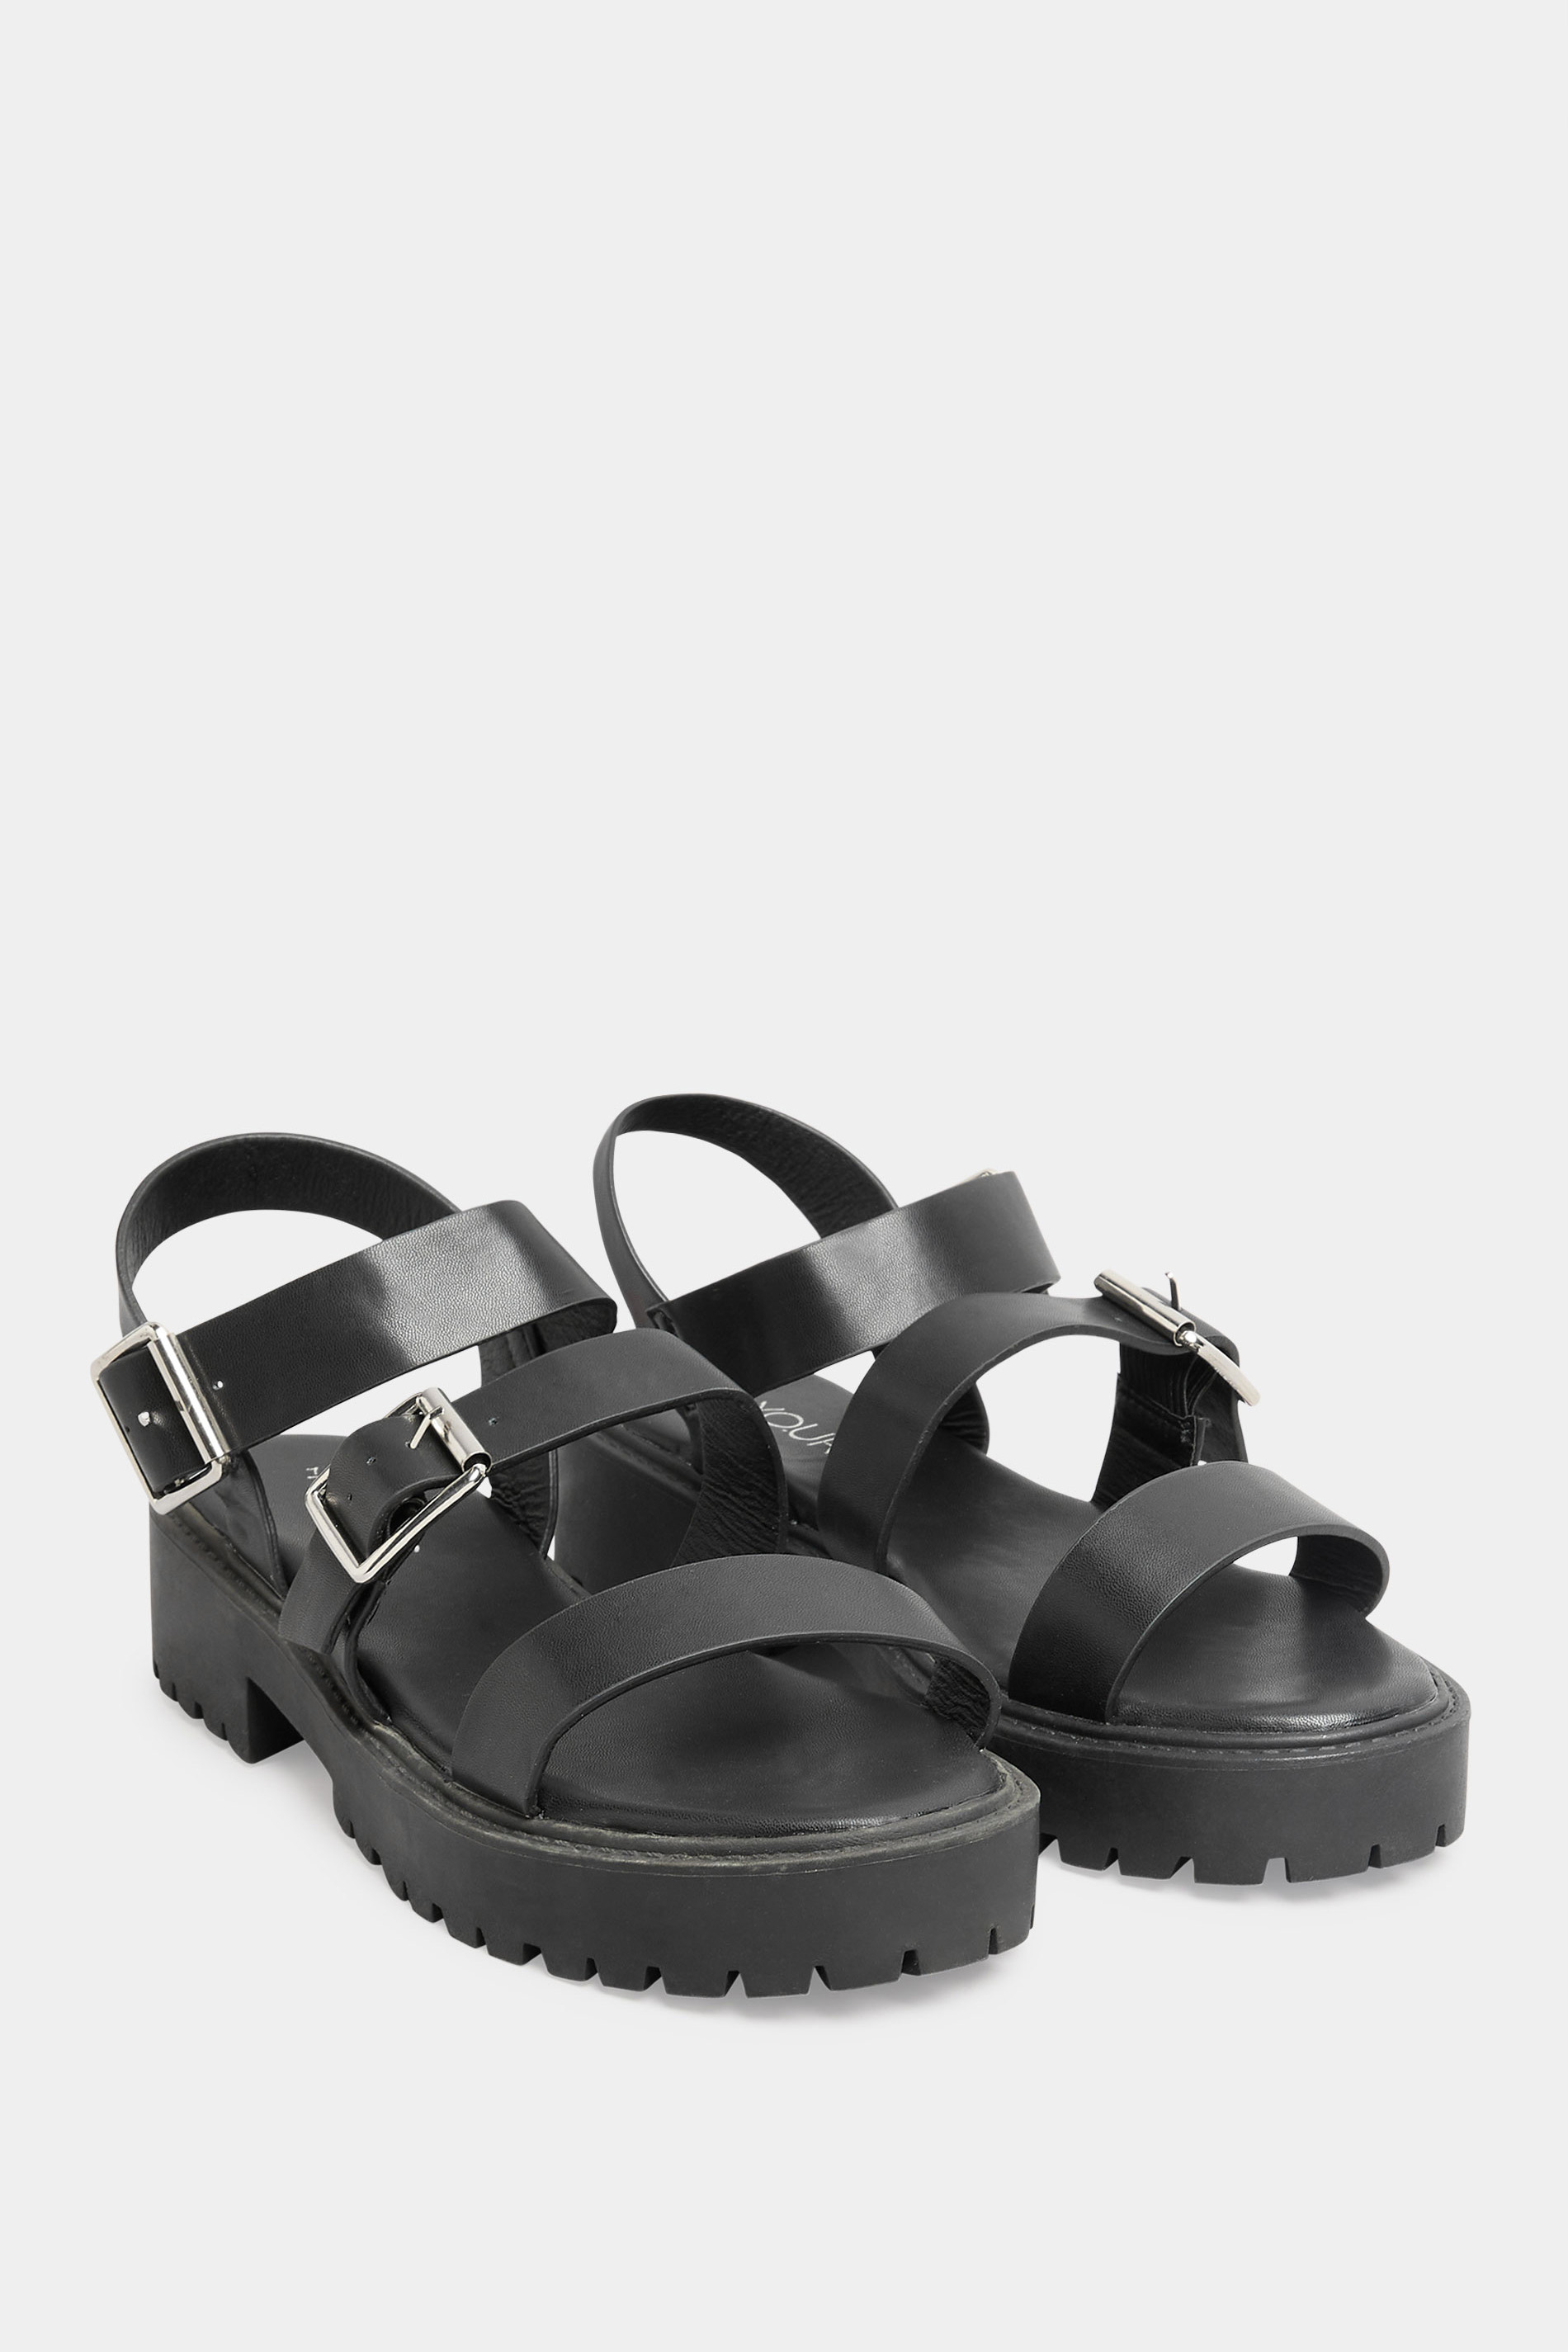 Black Chunky Buckle Sandals in Extra Wide EEE Fit | Yours Clothing